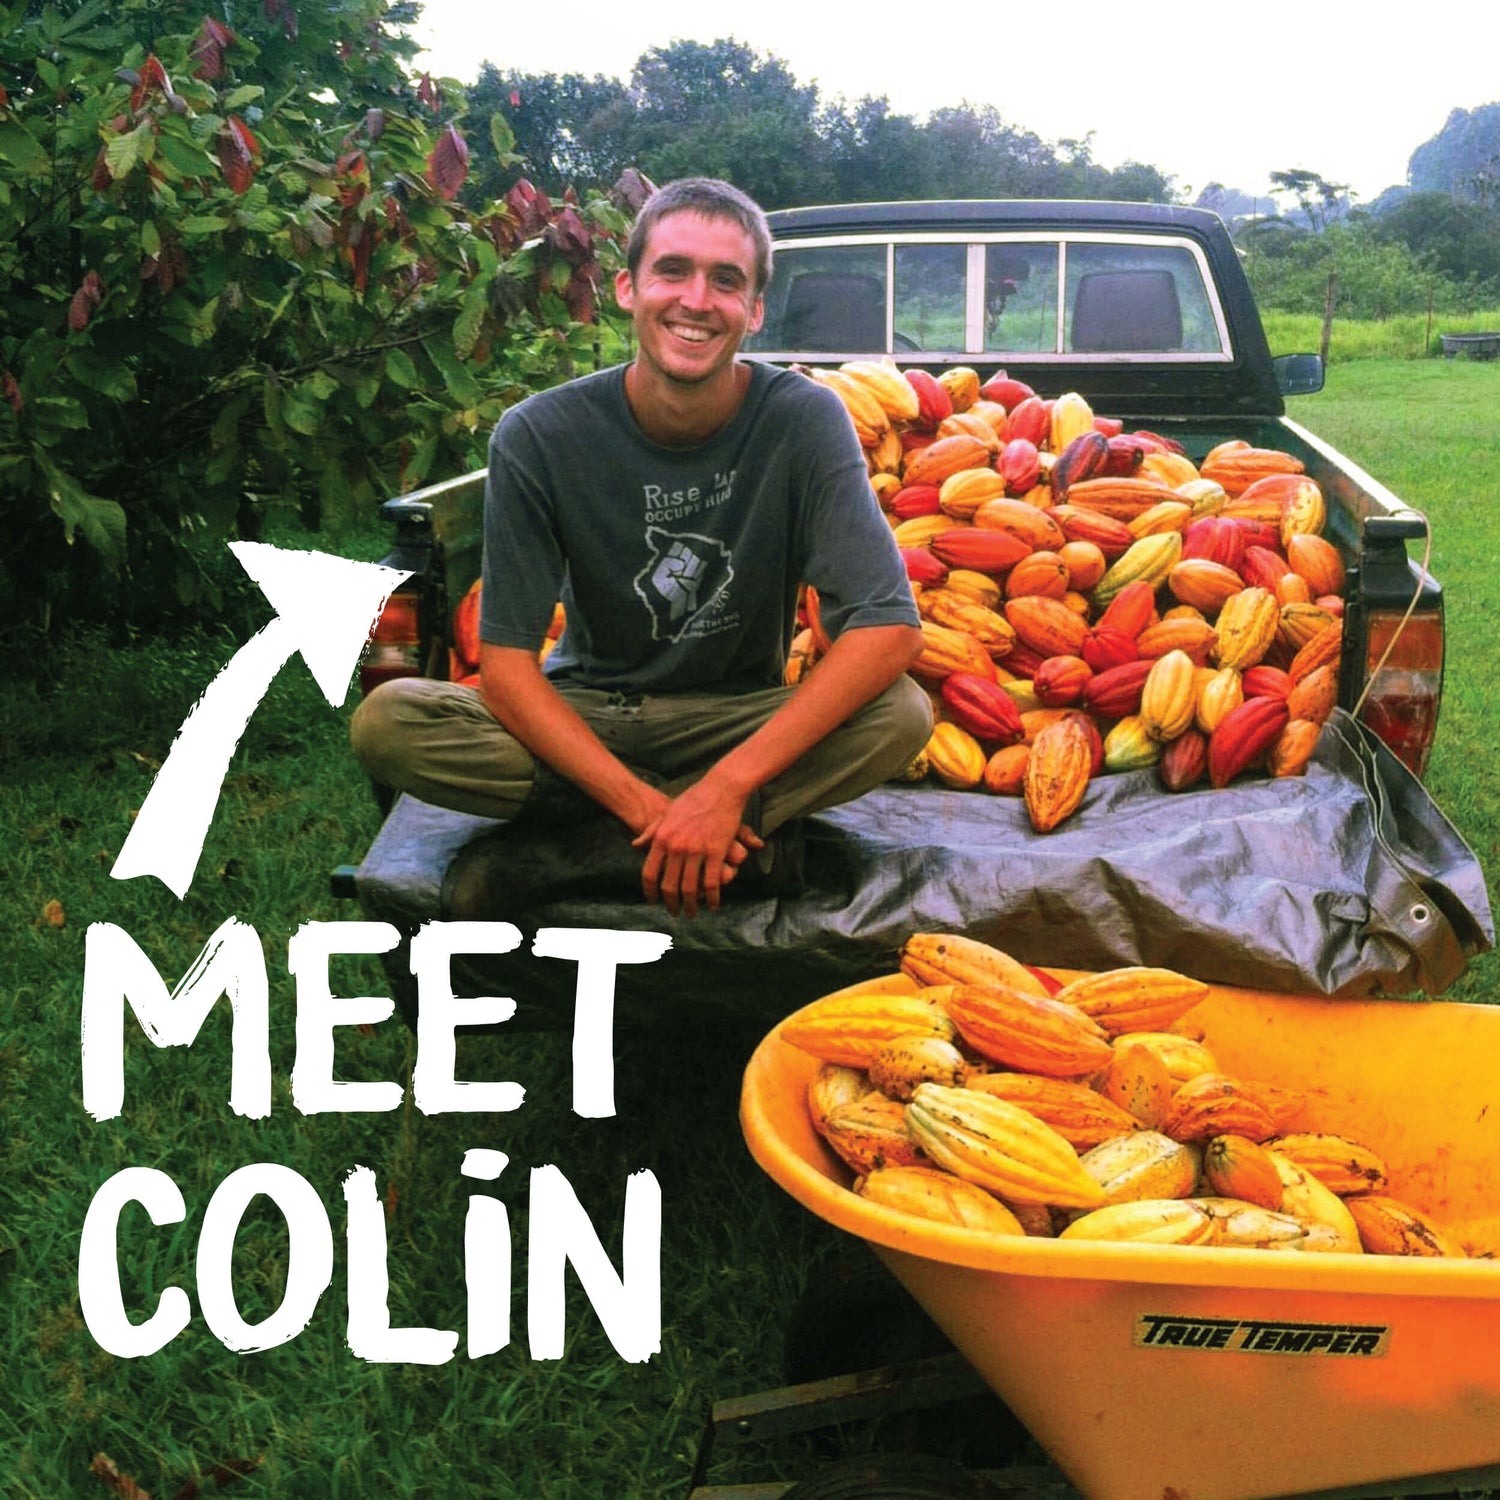 Image of farmer Colin Hart in bed of pickup truck with a bounty of cacao pods